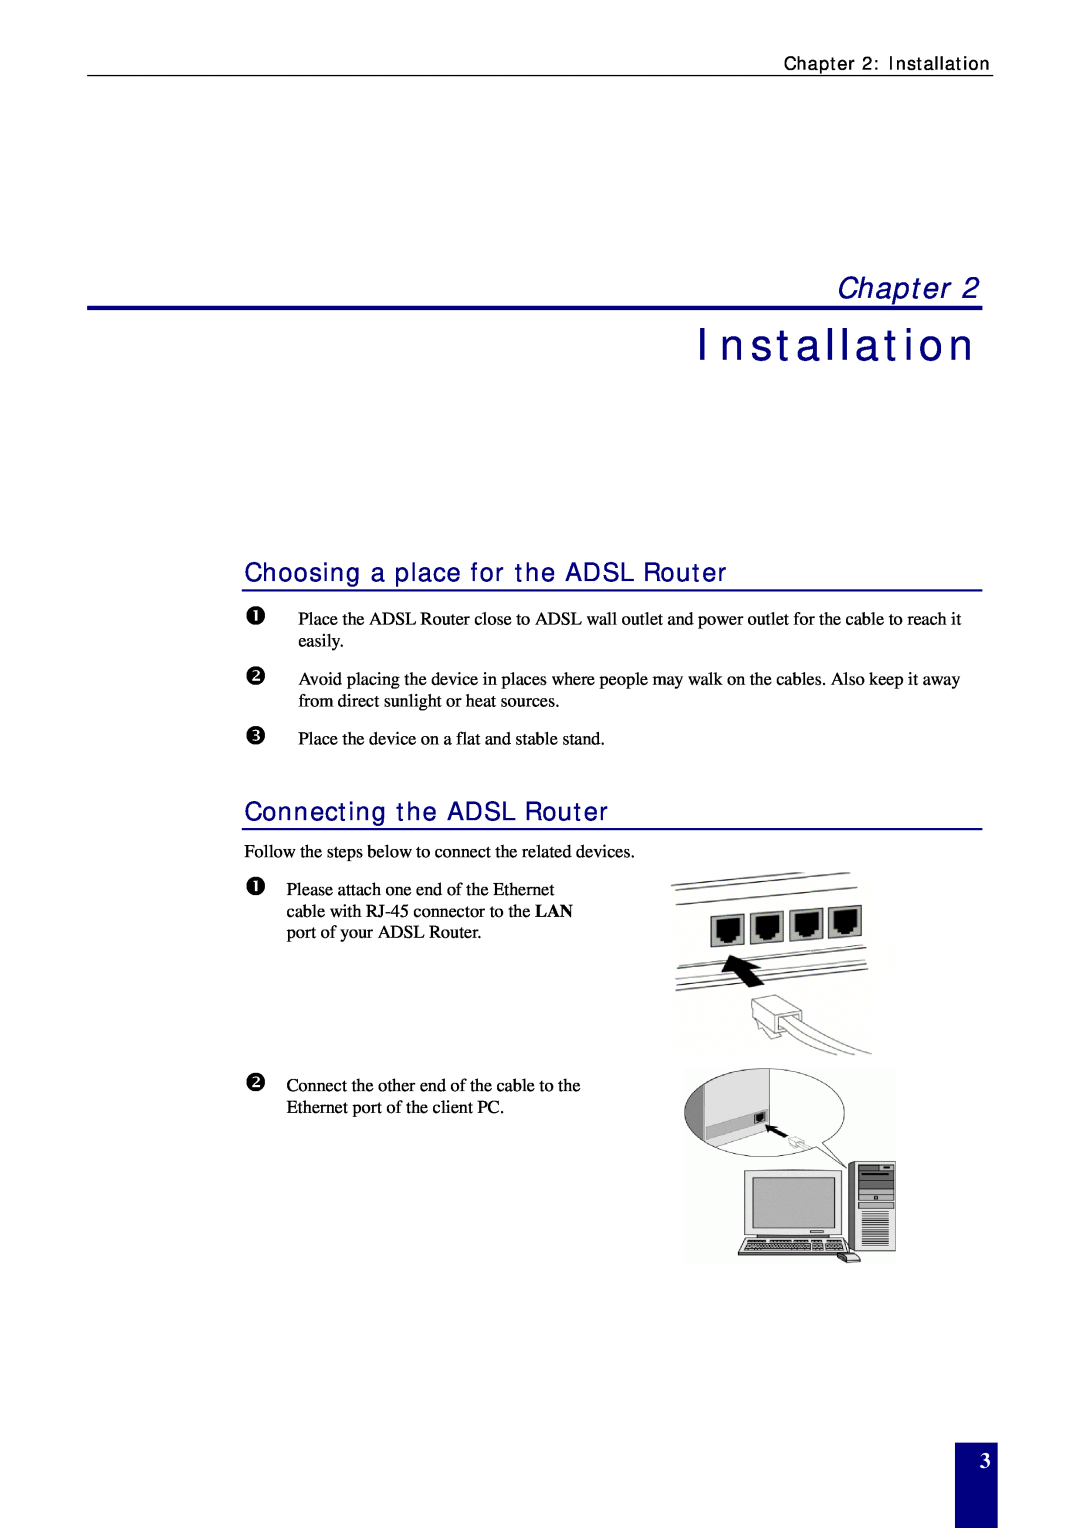 Dynalink RTA770W user manual Installation, Choosing a place for the ADSL Router, Connecting the ADSL Router, Chapter 